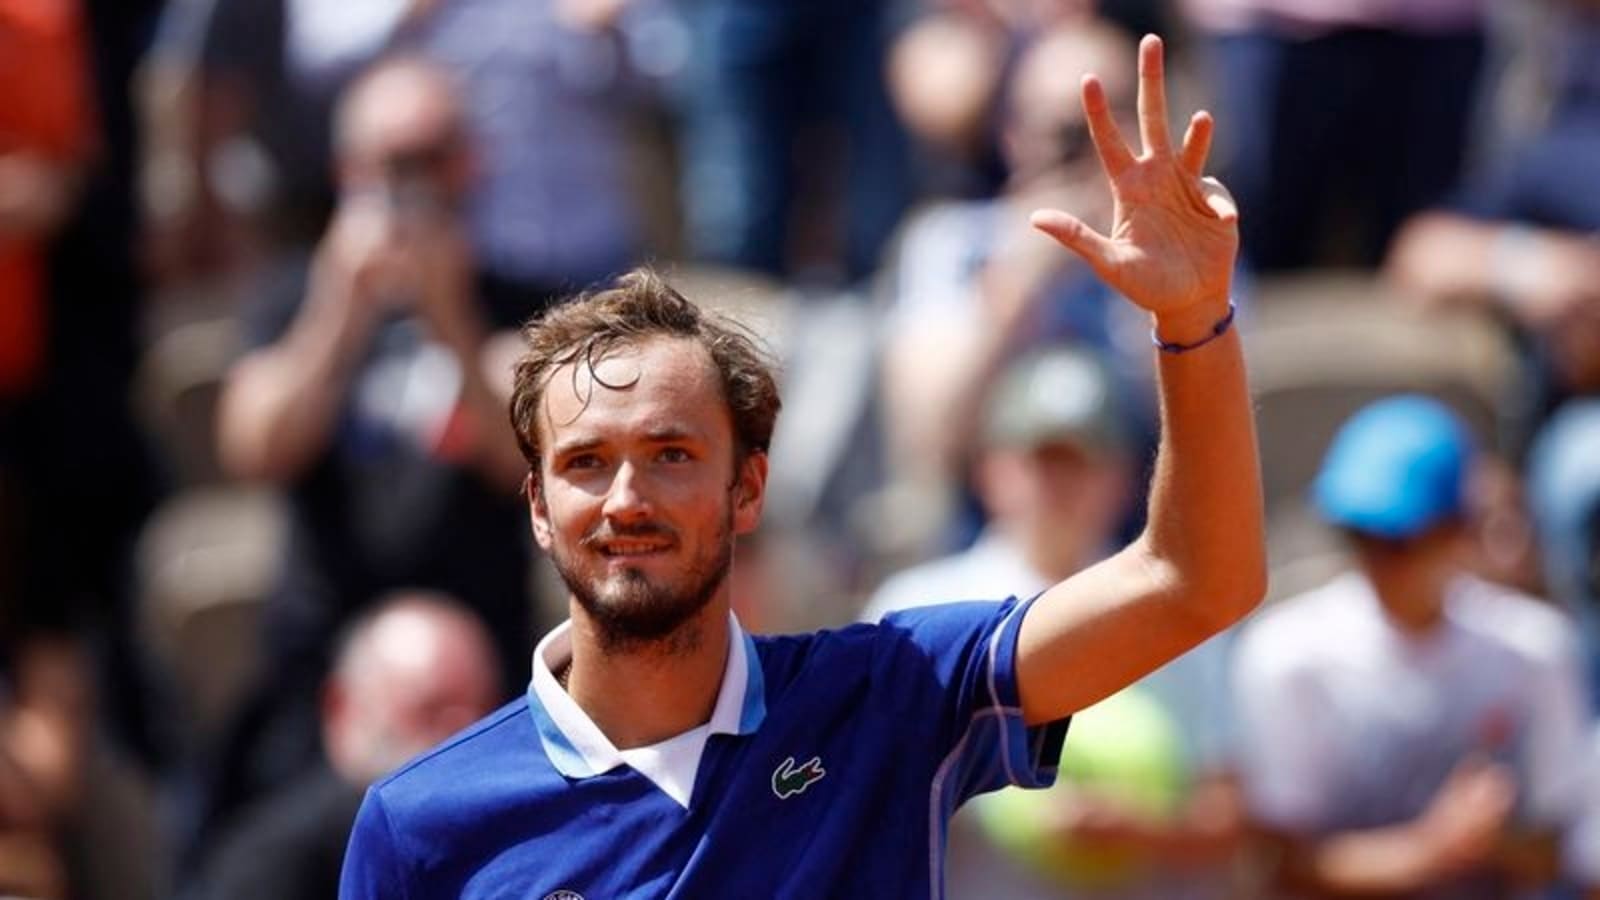 French Open: Daniil Medvedev cruises into 4th round after straight-set win over Miomir Kecmanovic